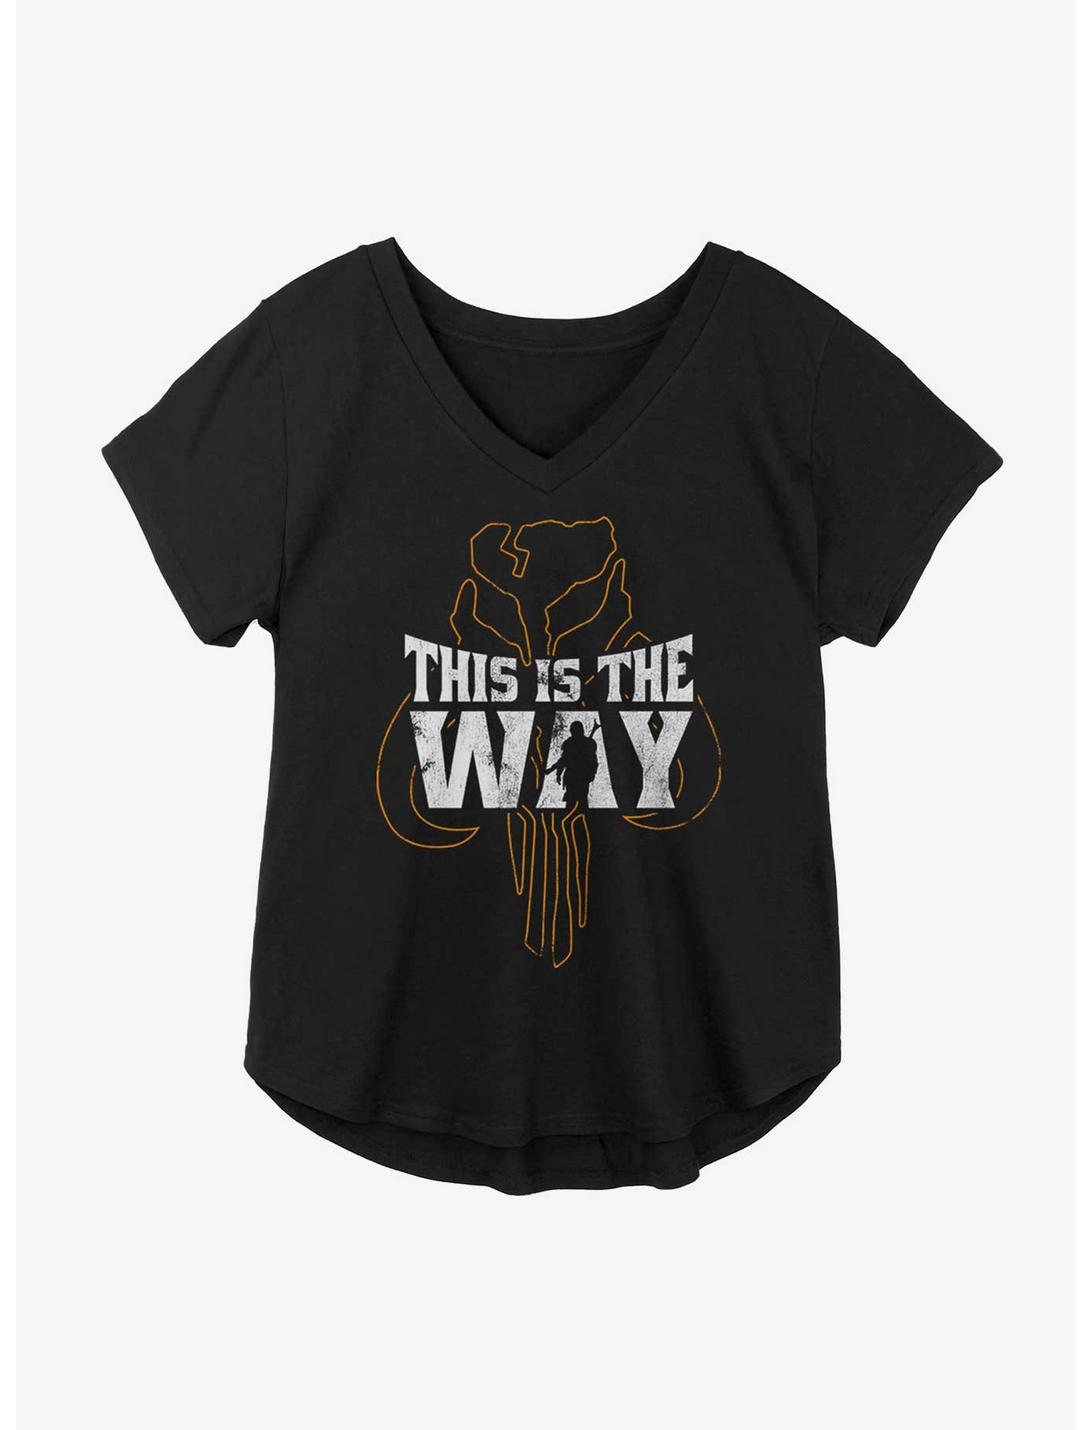 Star Wars The Mandalorian This Is The Way Girls Plus Size T-Shirt, BLACK, hi-res